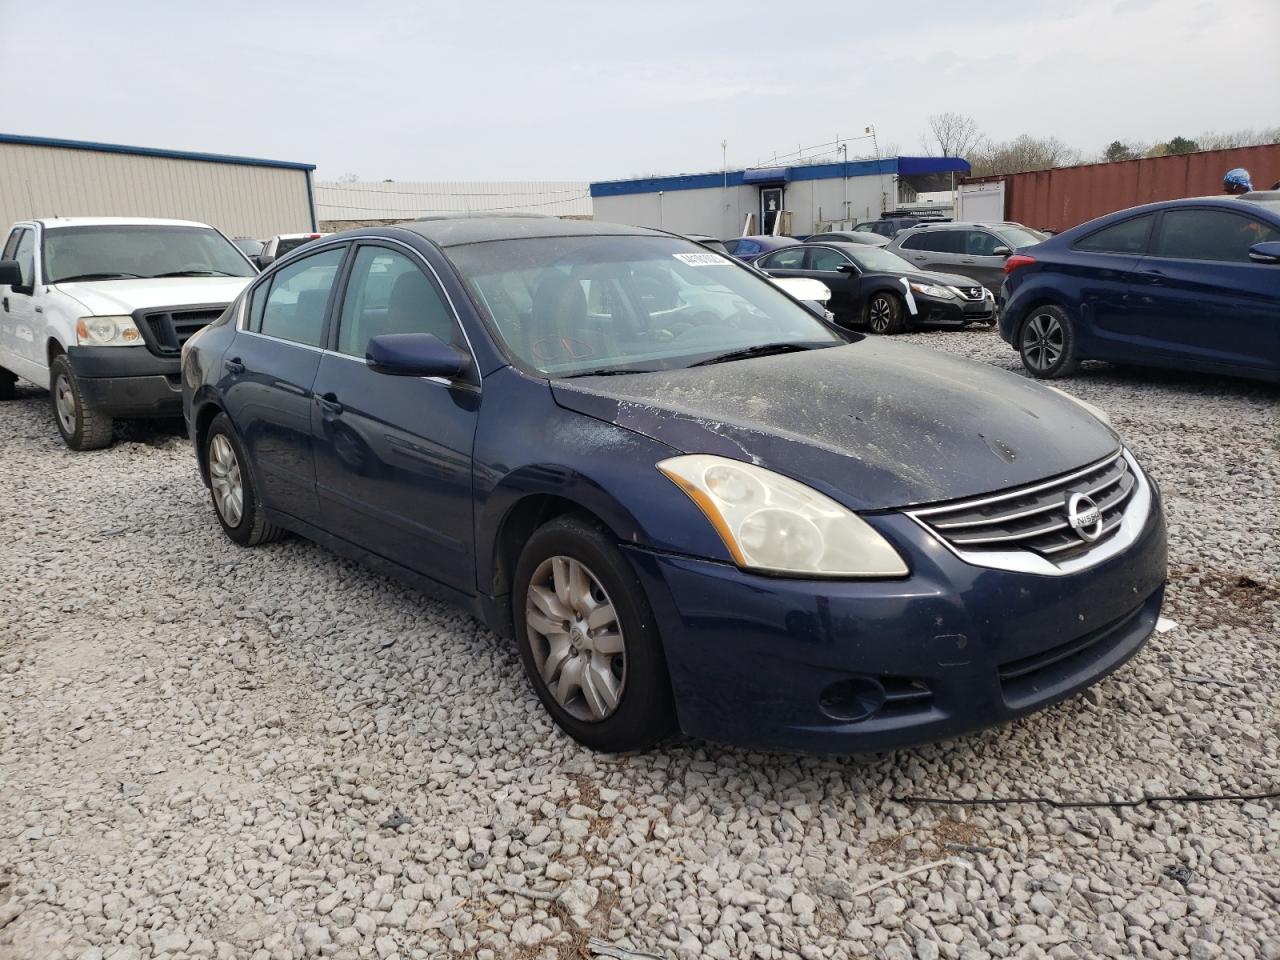 1N4AL2AP6BN****** Salvage and Wrecked 2011 Nissan Altima in Alabama State